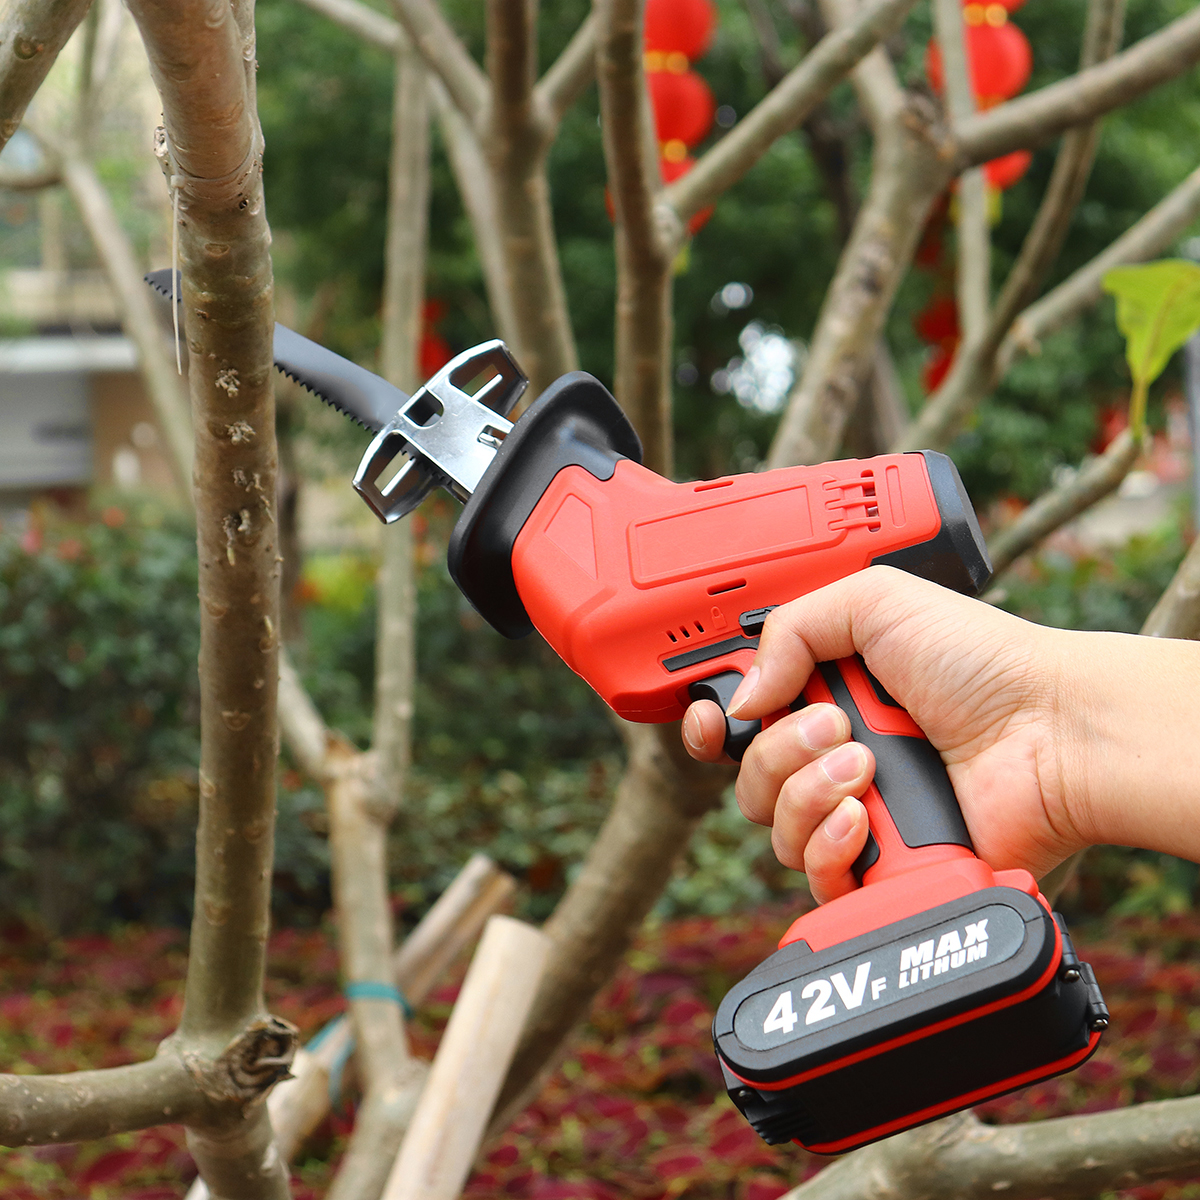 42VF-13000mAh-Cordless-Reciprocating-Saw-Electric-Saws-Portable-Woodworking-Power-Tools-1640981-9